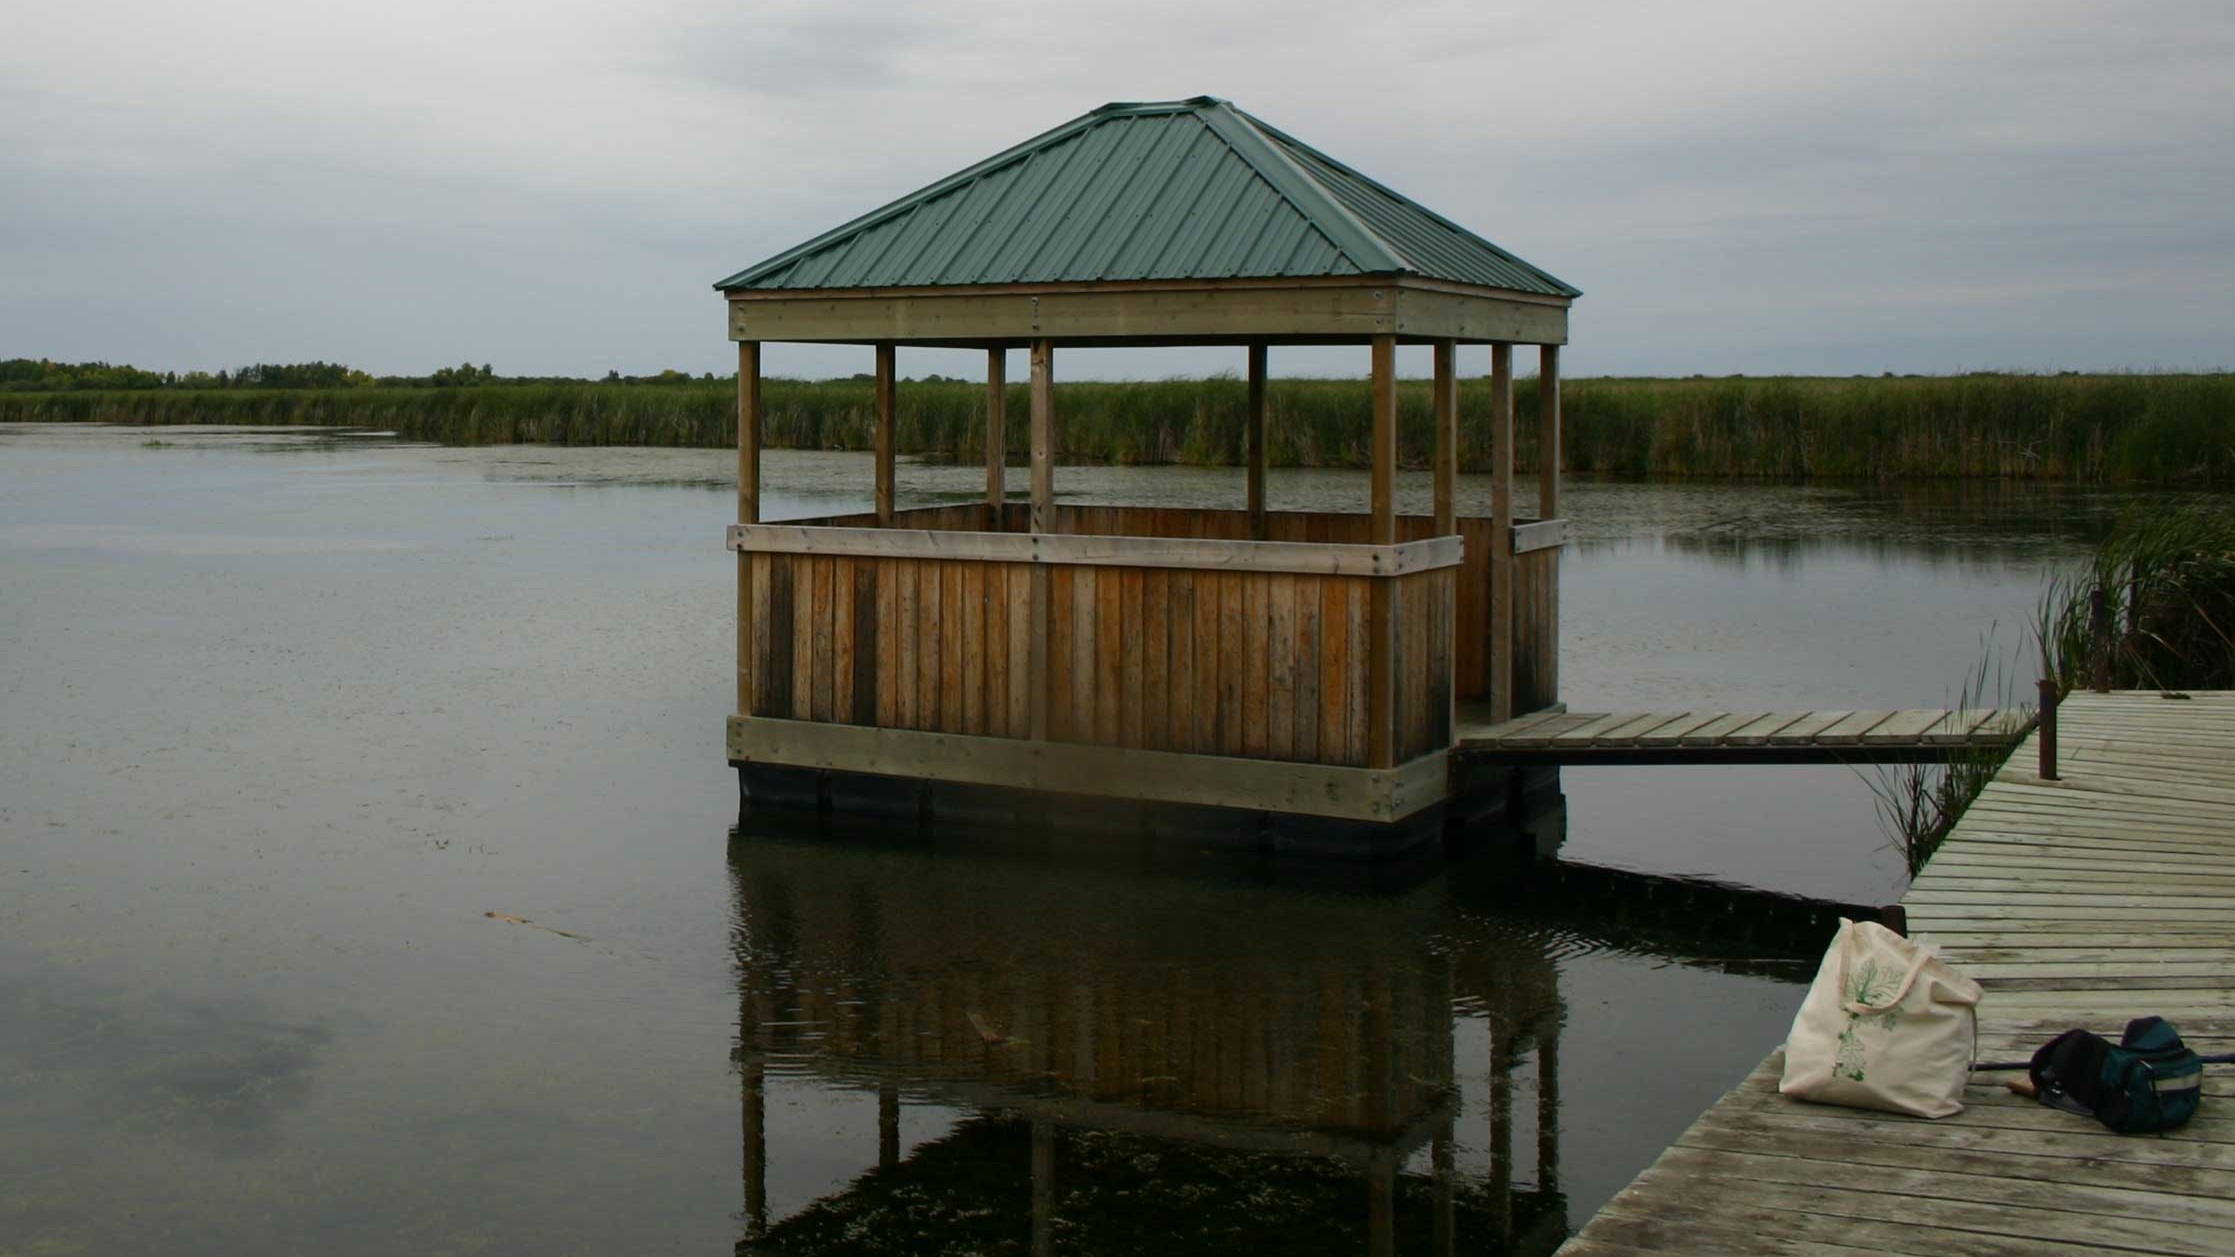 A floating wooden view point at the end of a boardwalk on a lake on a cloudy day.